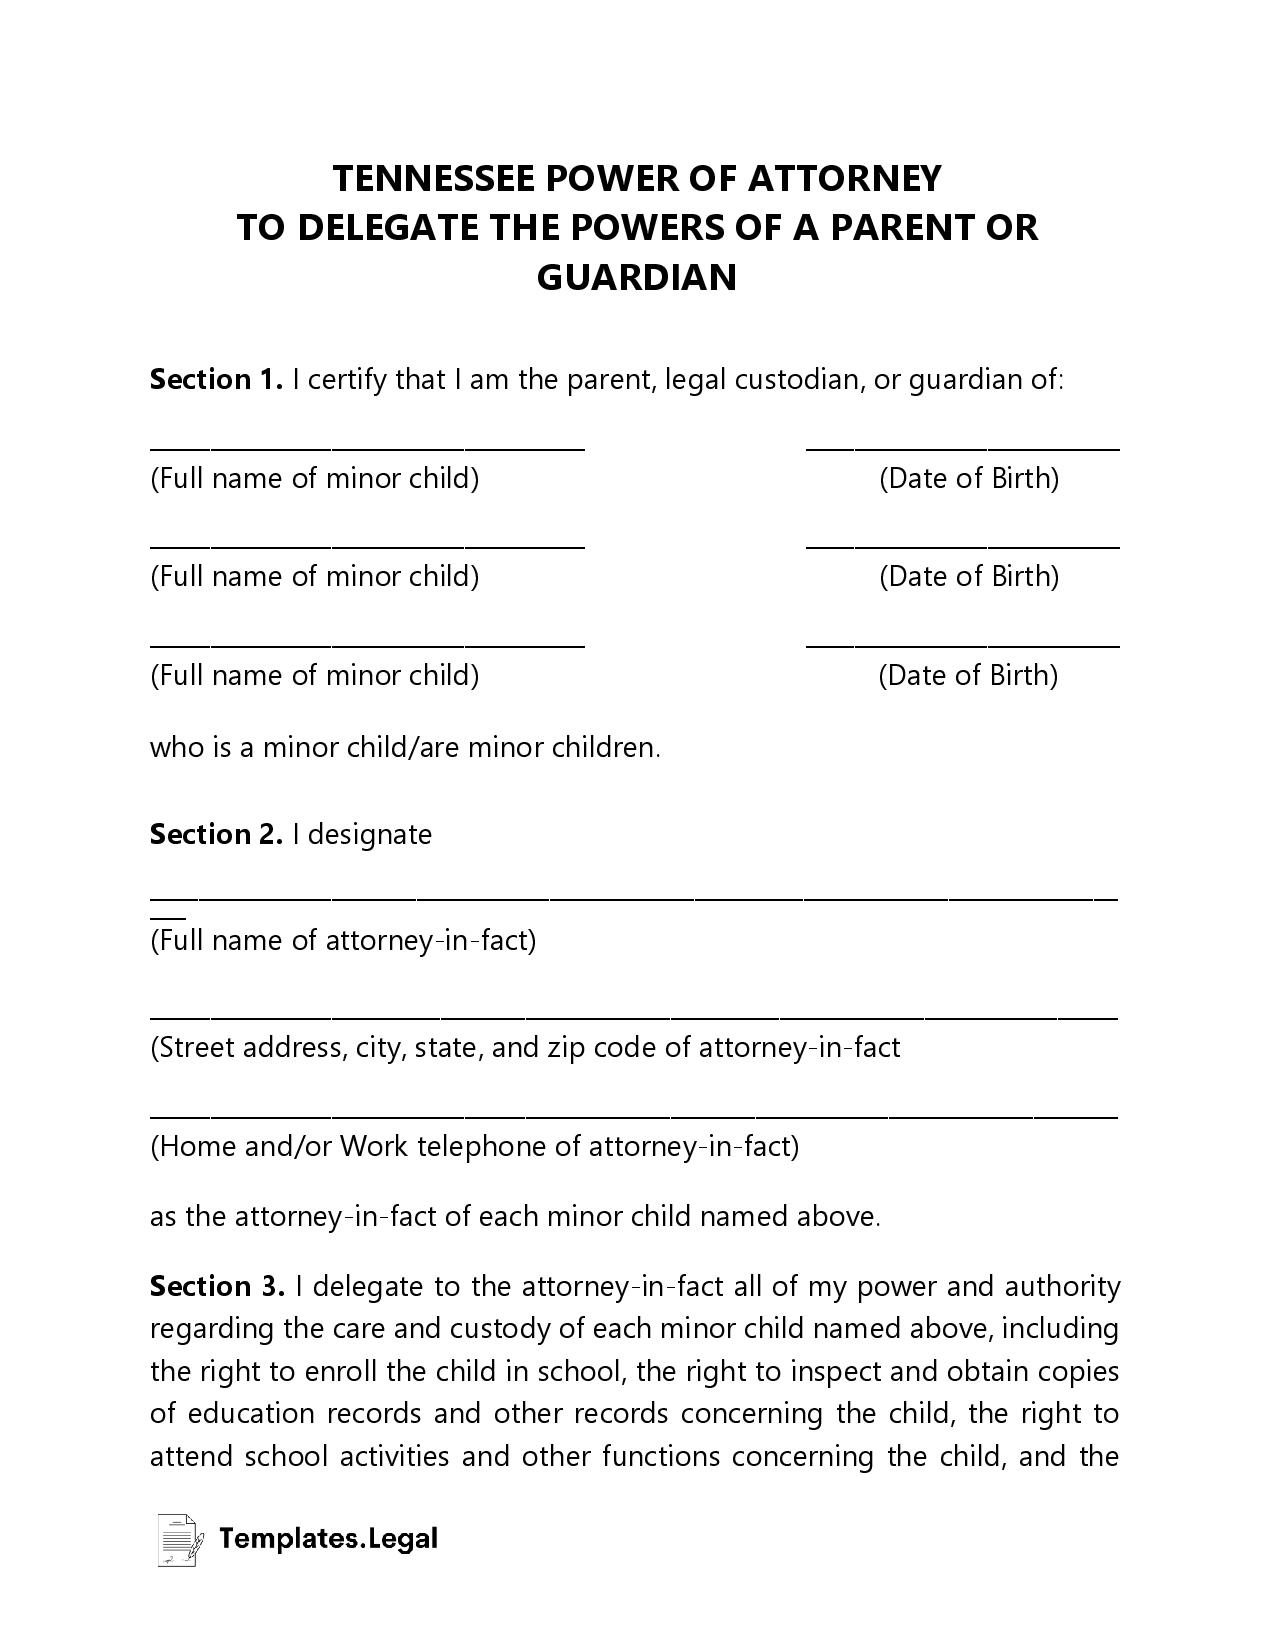 Tennessee Power of Attorney Templates (Free) [Word, PDF & ODT]